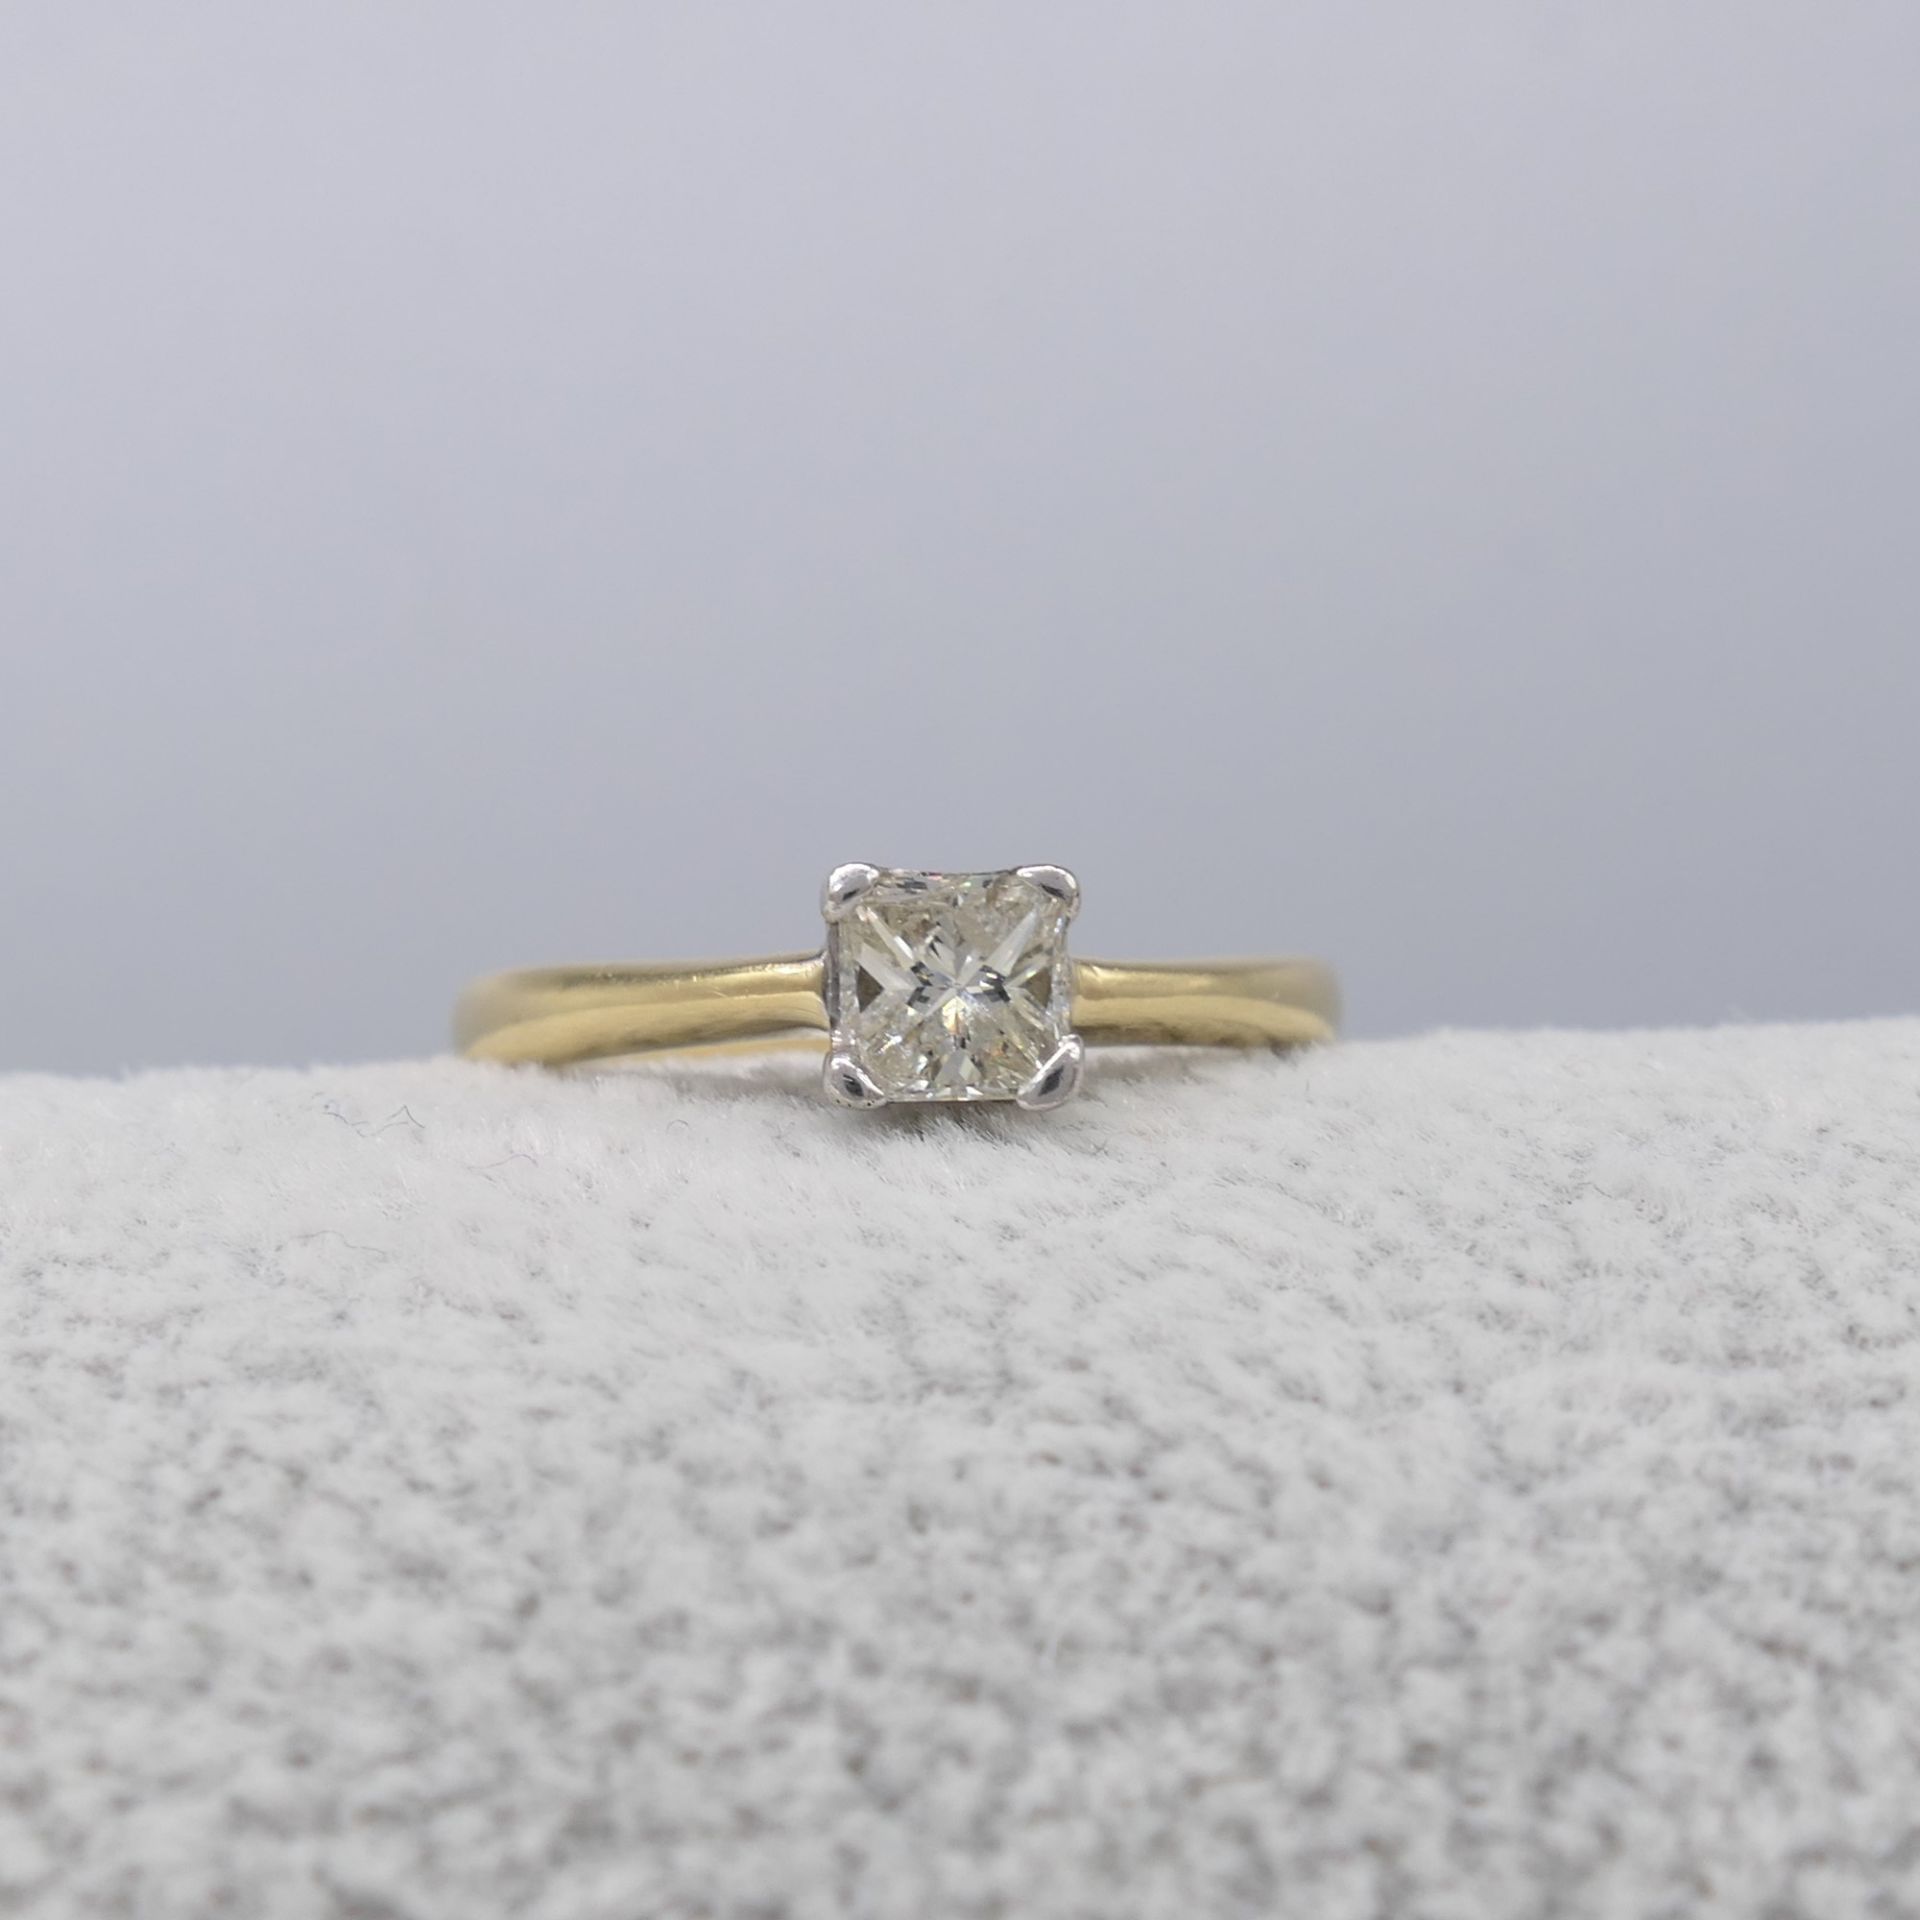 Square princess-cut 0.52 carat diamond solitaire ring in 18ct gold, with report - Image 5 of 7